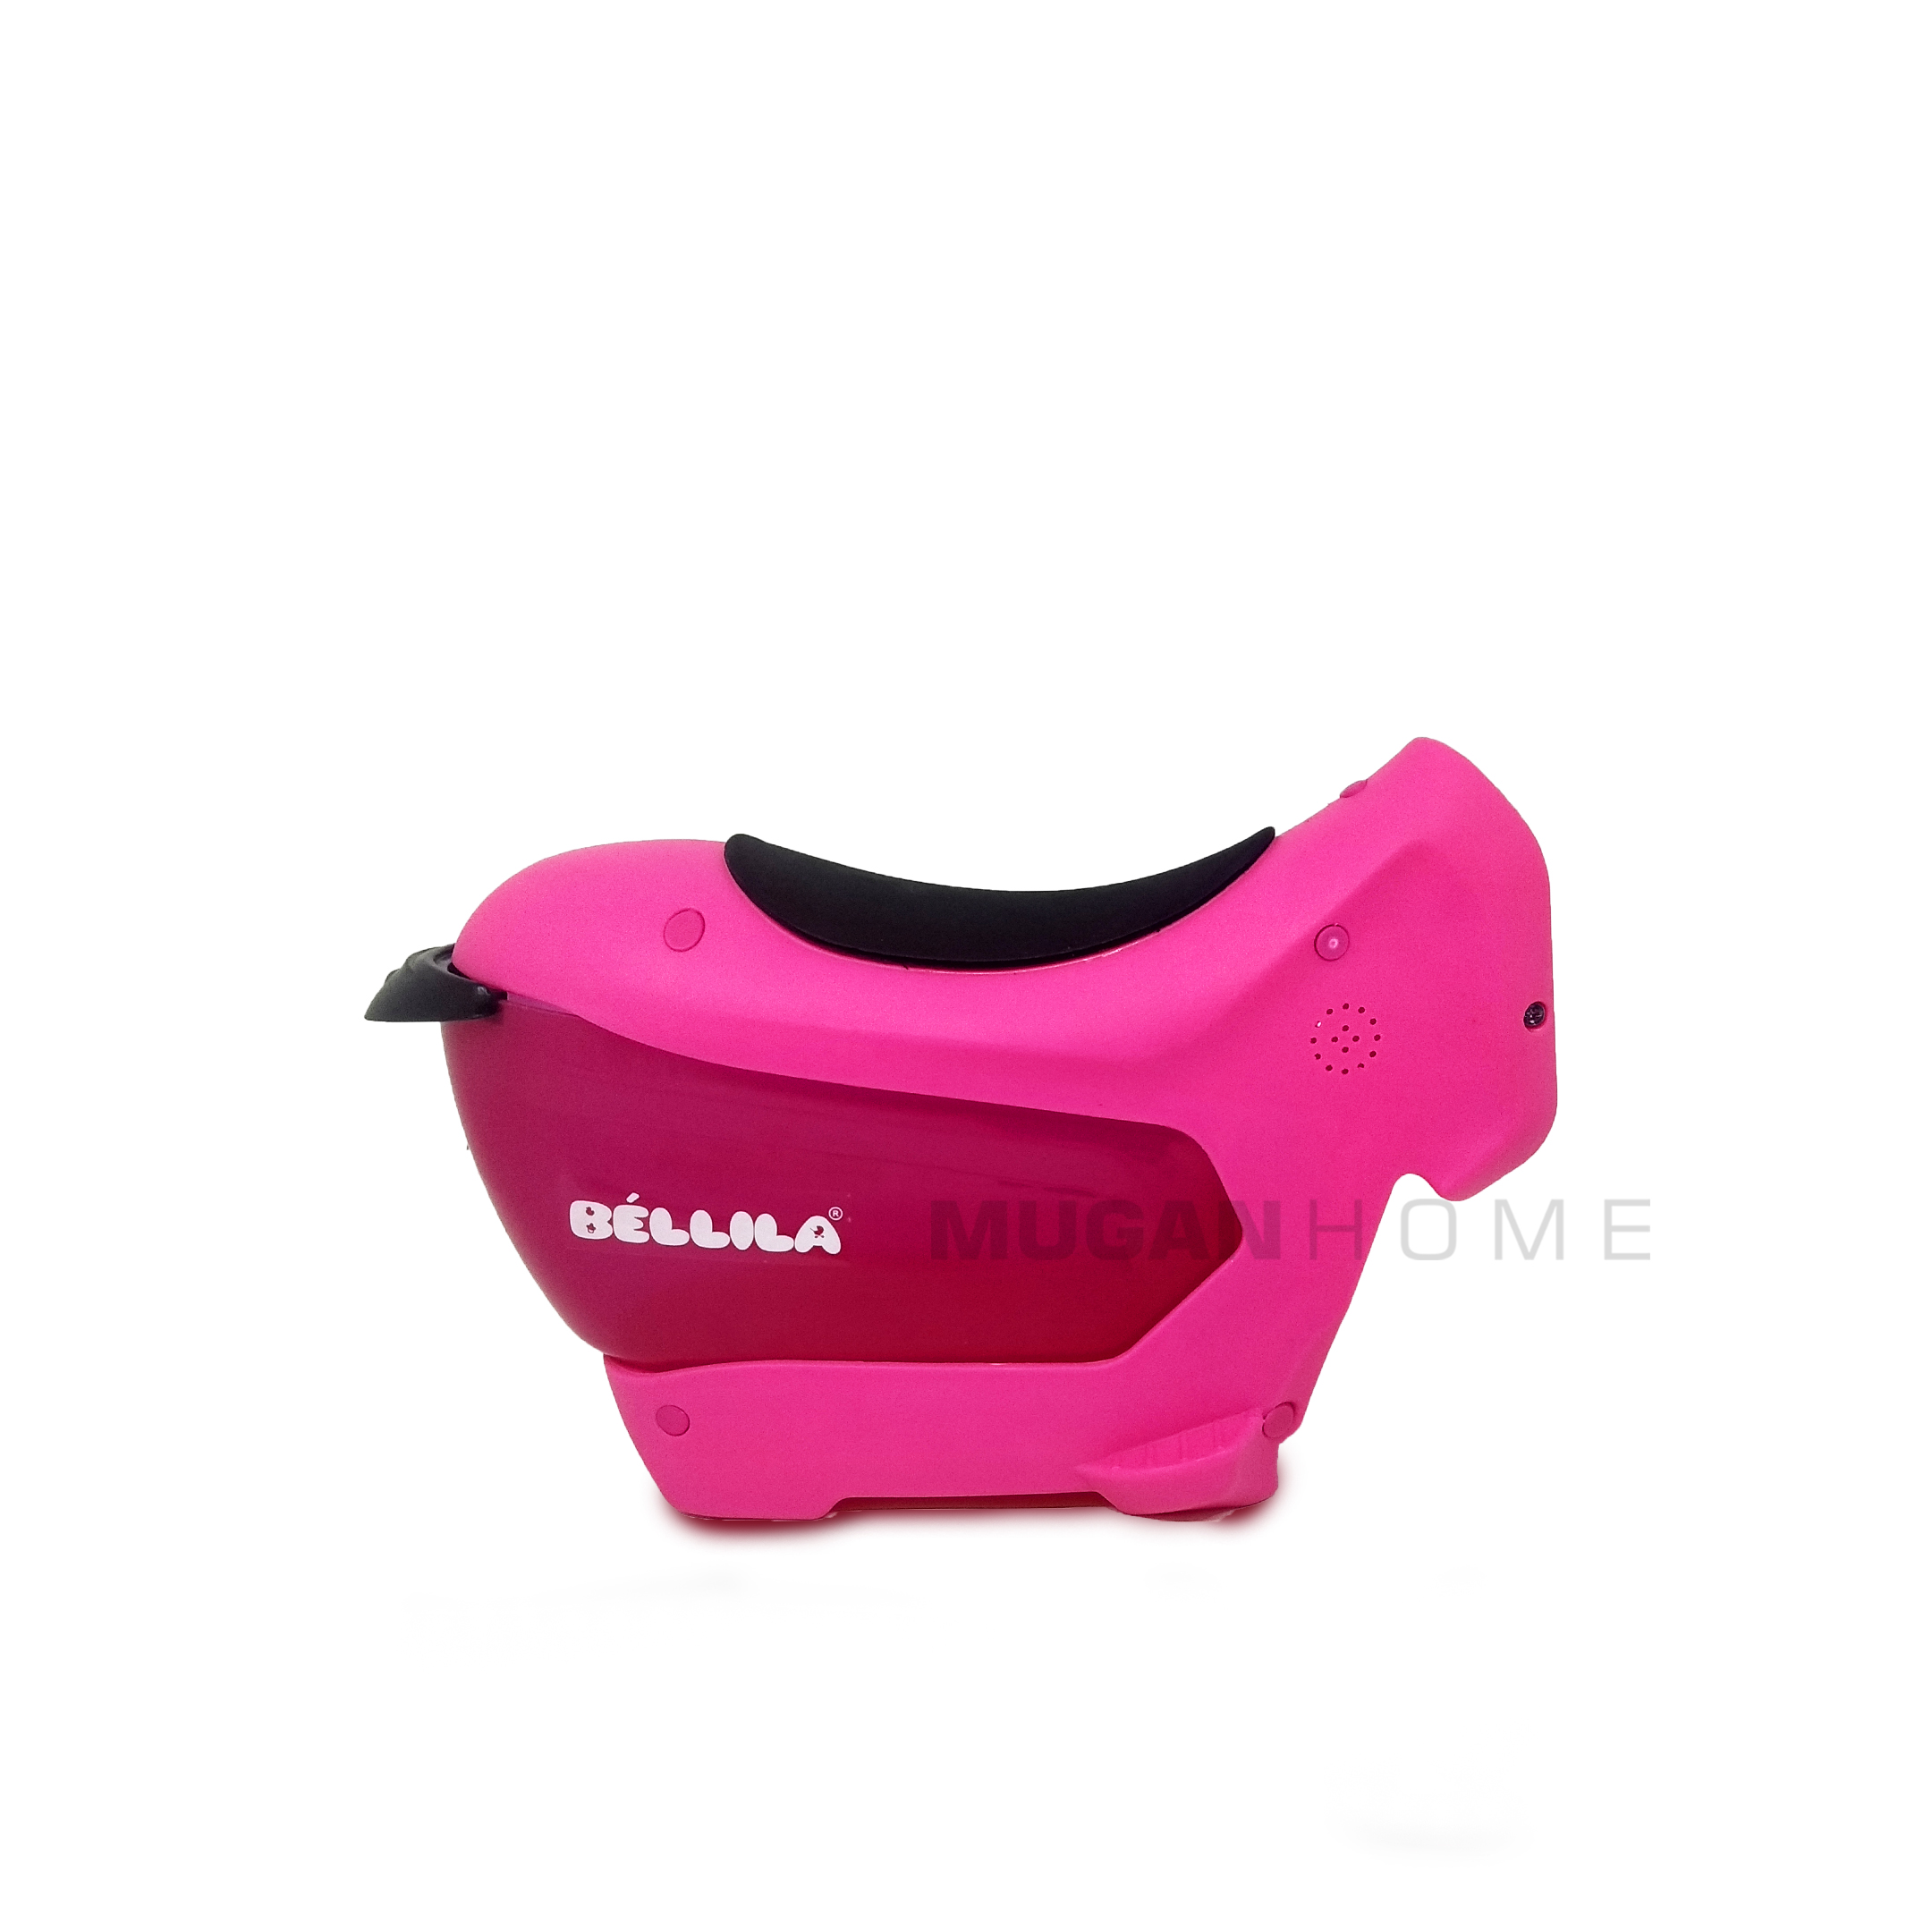 MICRO MINI DELUXE SCOOTER 3 IN 1 PINK